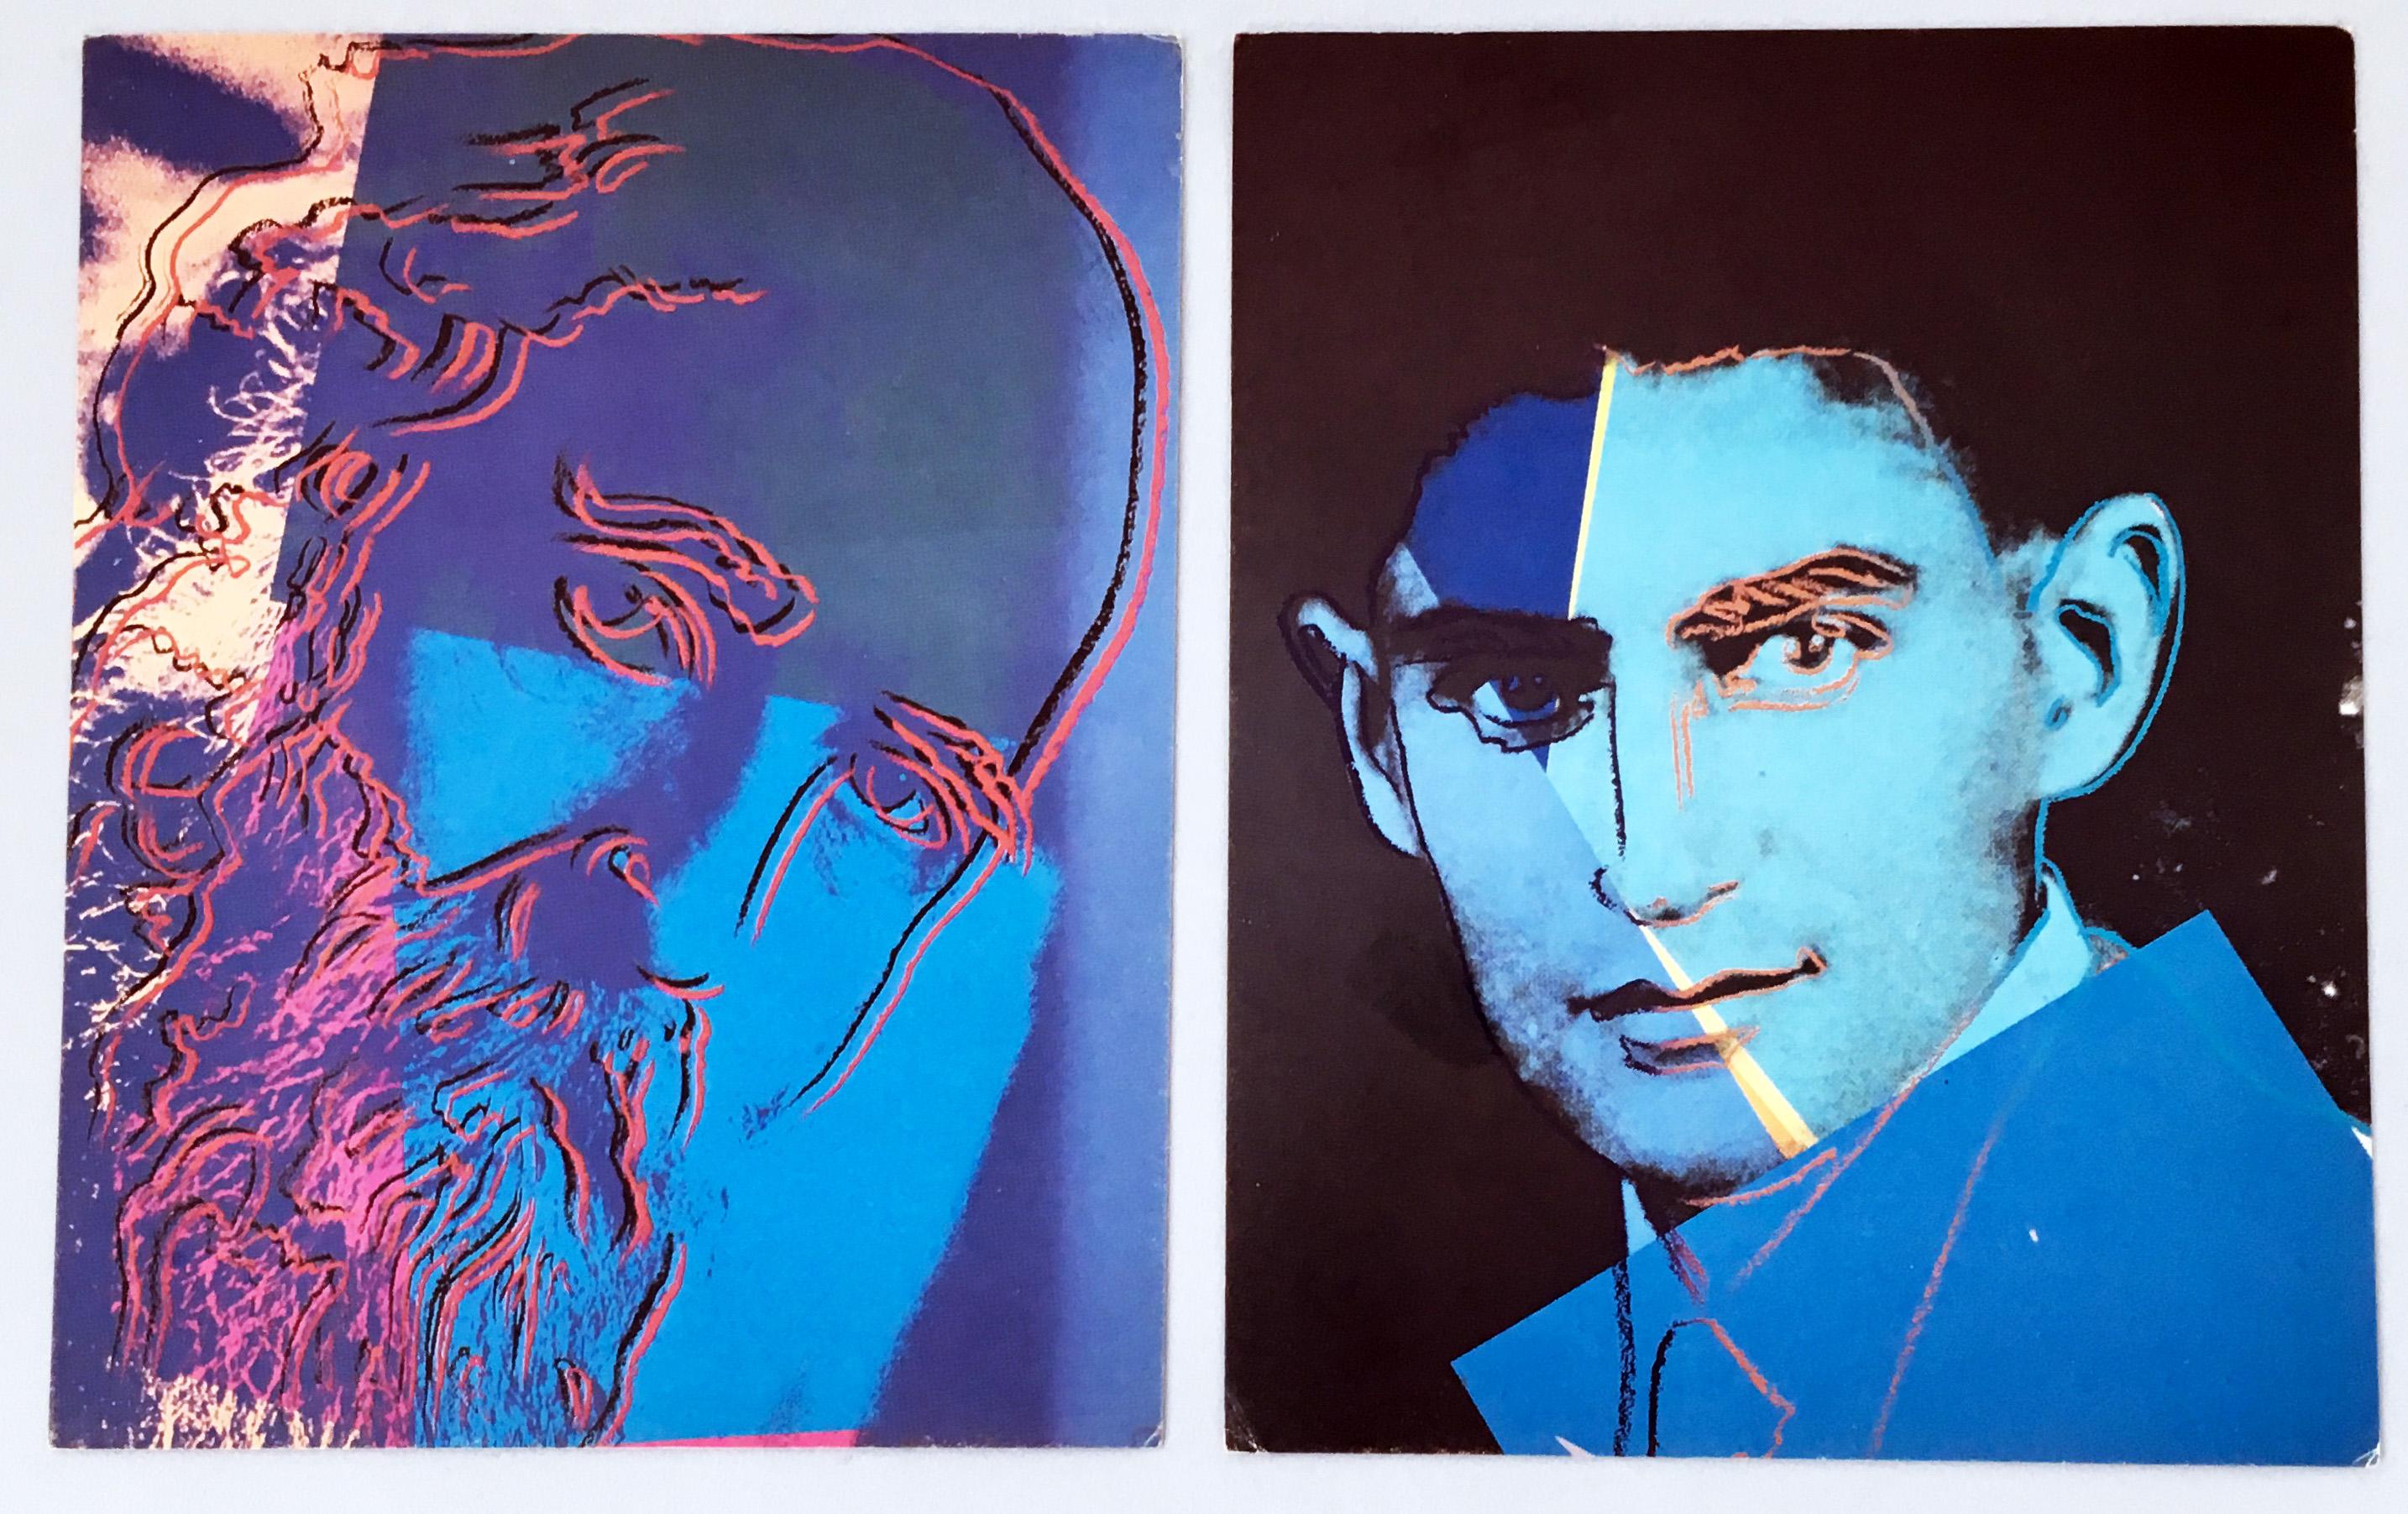 Warhol Portraits of Jews of the 20th Century  (set of ten 1980 announcements)  - Gray Portrait Print by (after) Andy Warhol